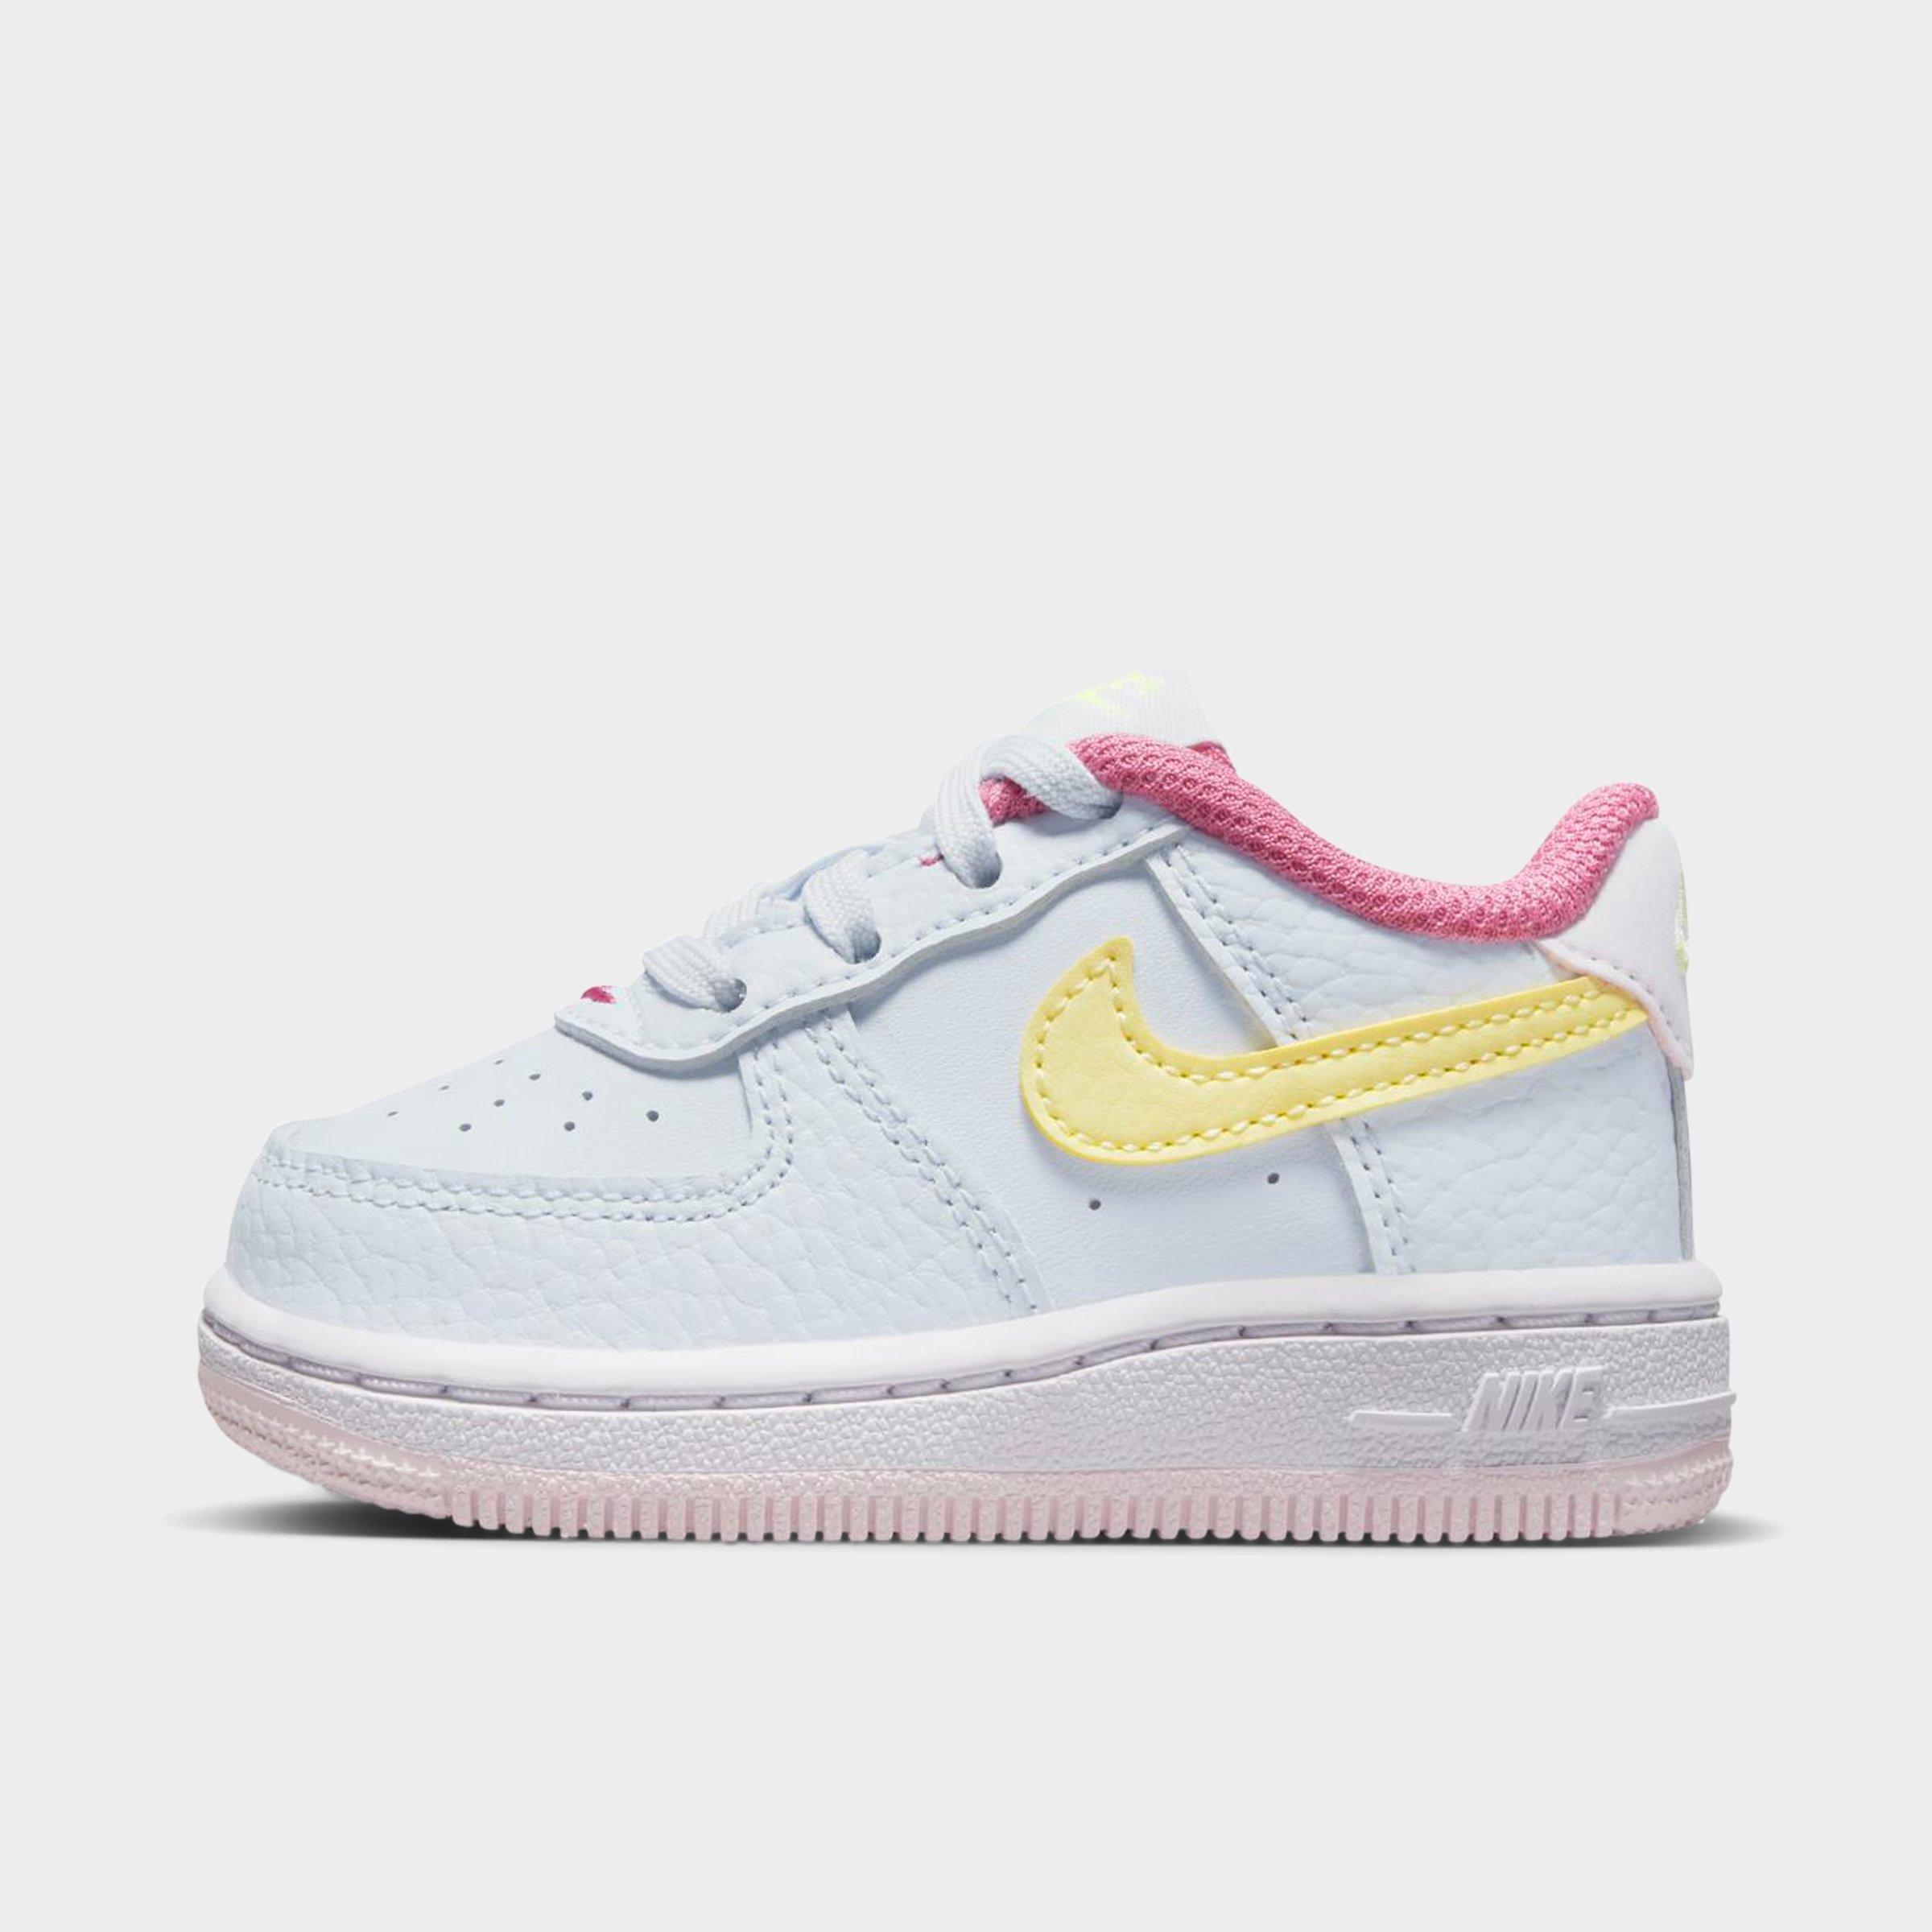 NIKE NIKE KIDS' TODDLER FORCE 1 CASUAL SHOES